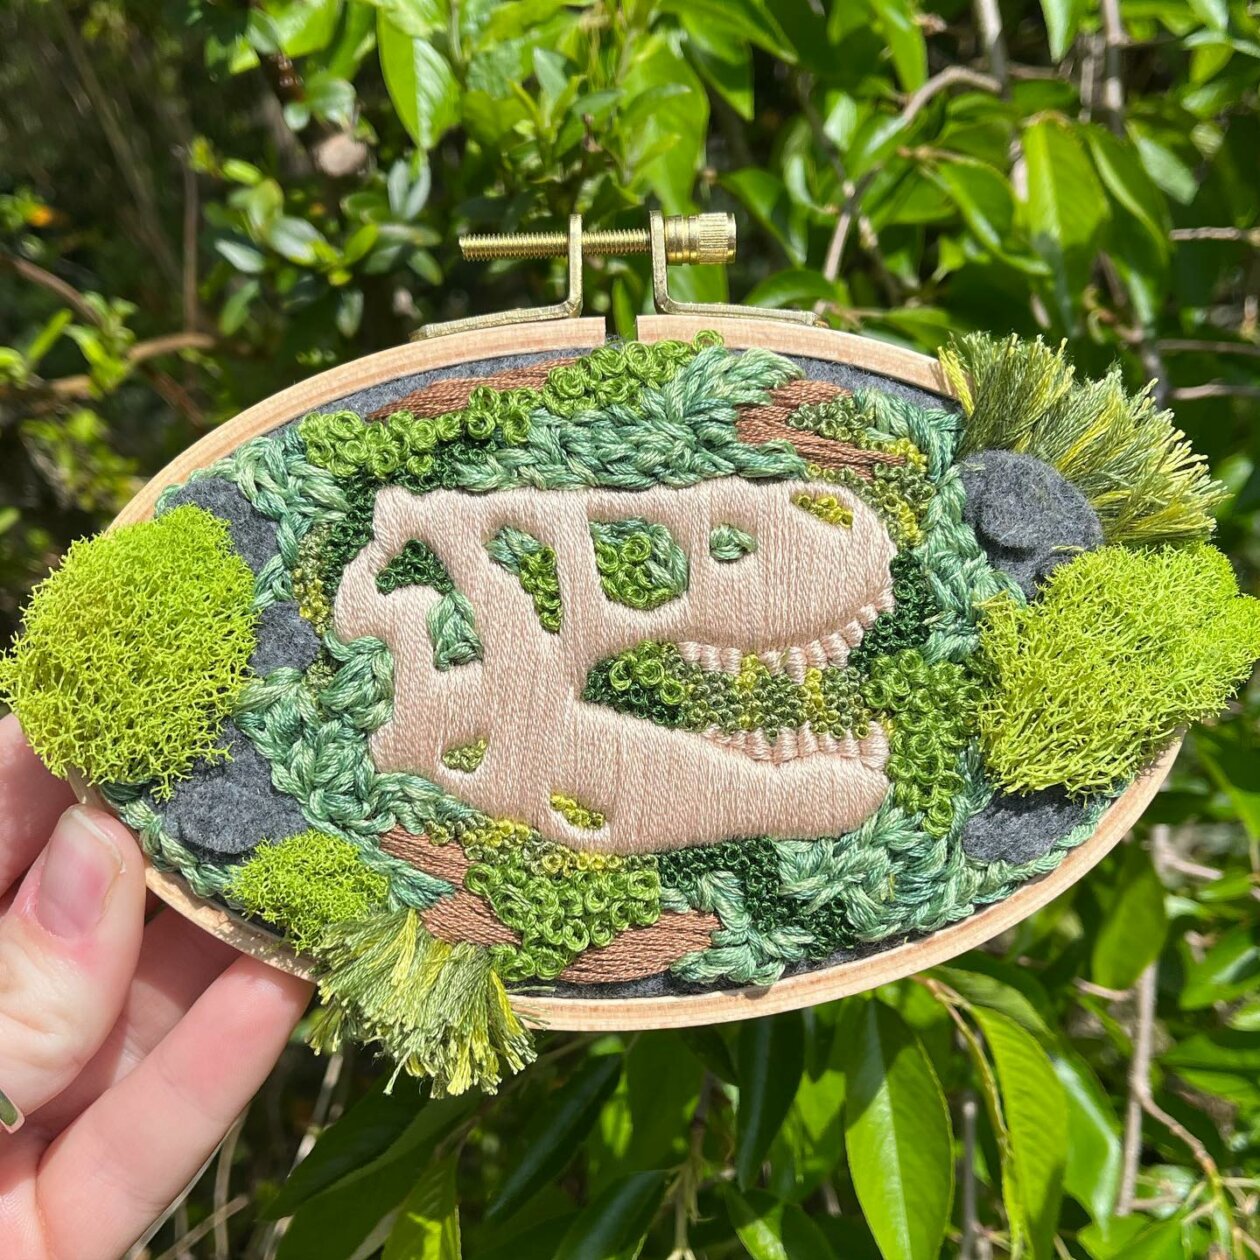 Embroidered Fossils, The Nature Inspired Embroidery Art Of Rachel Crisp (10)